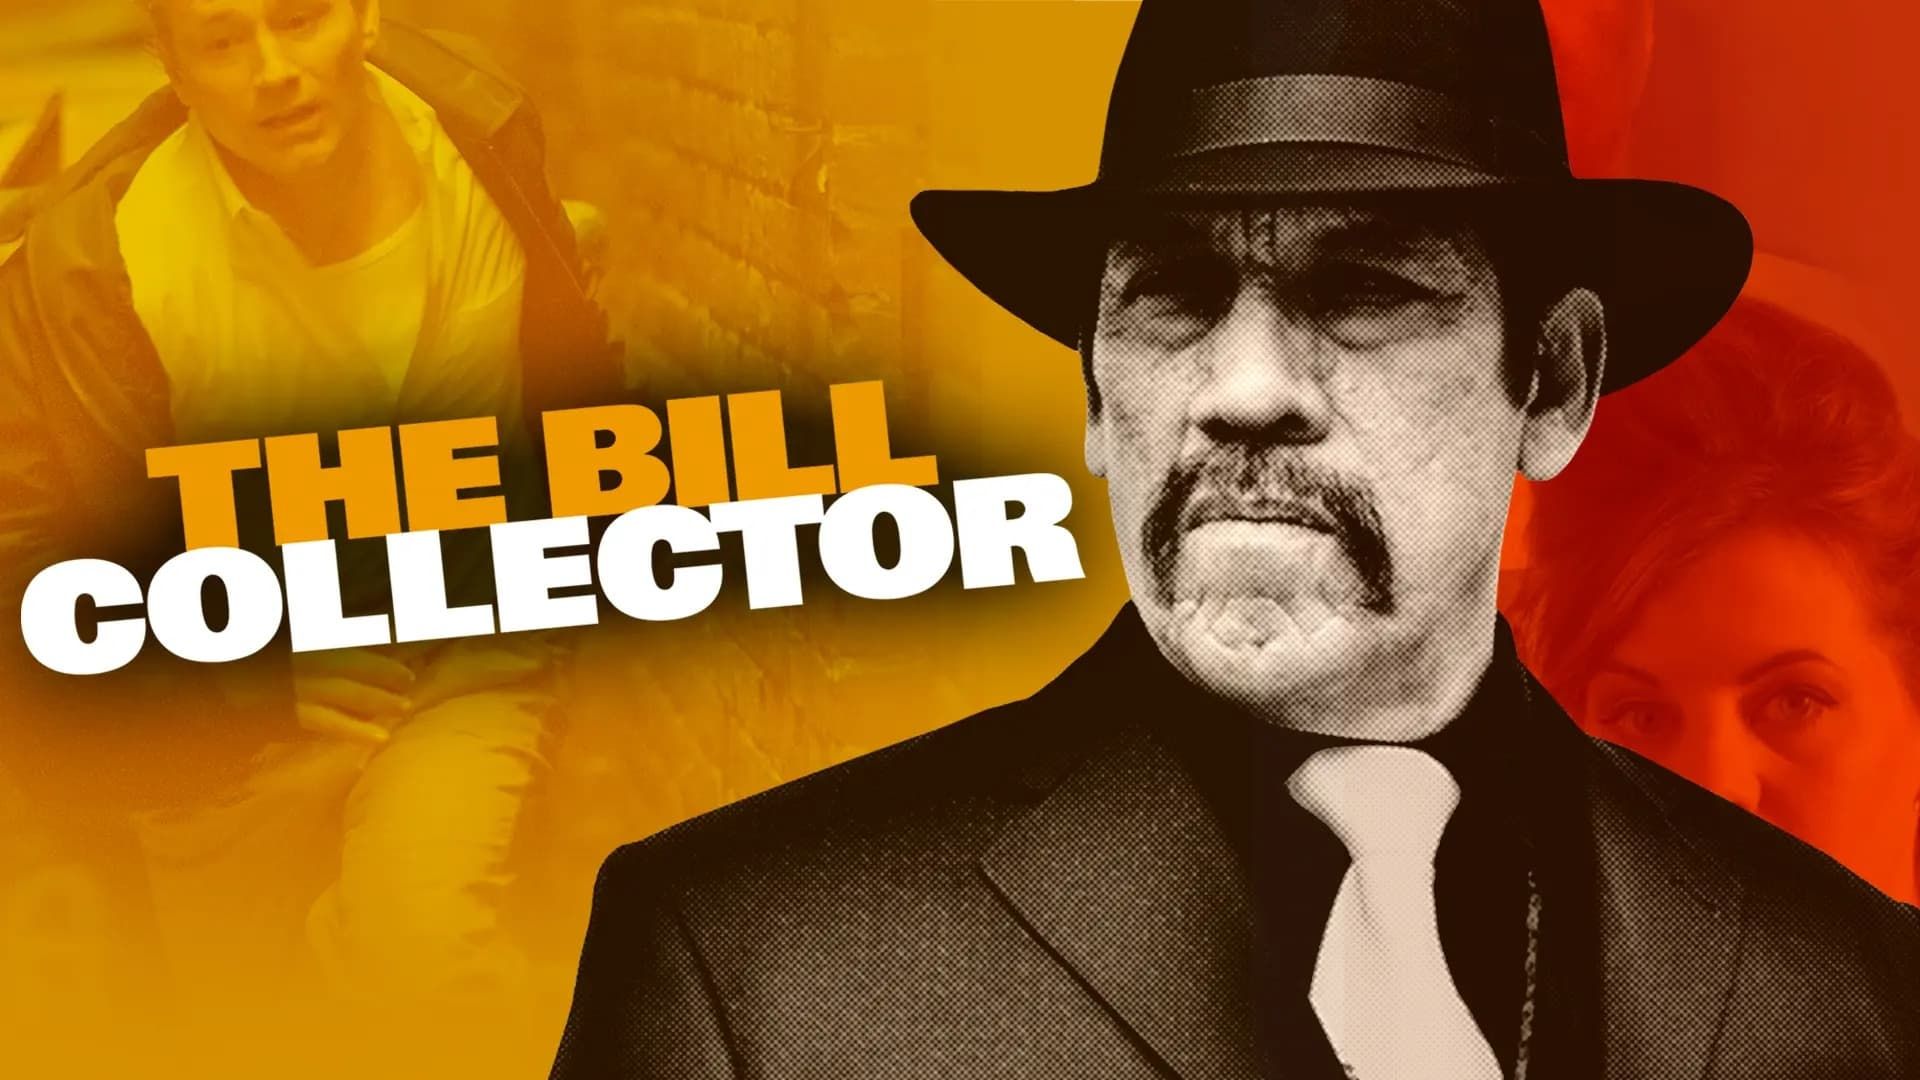 The Bill Collector background